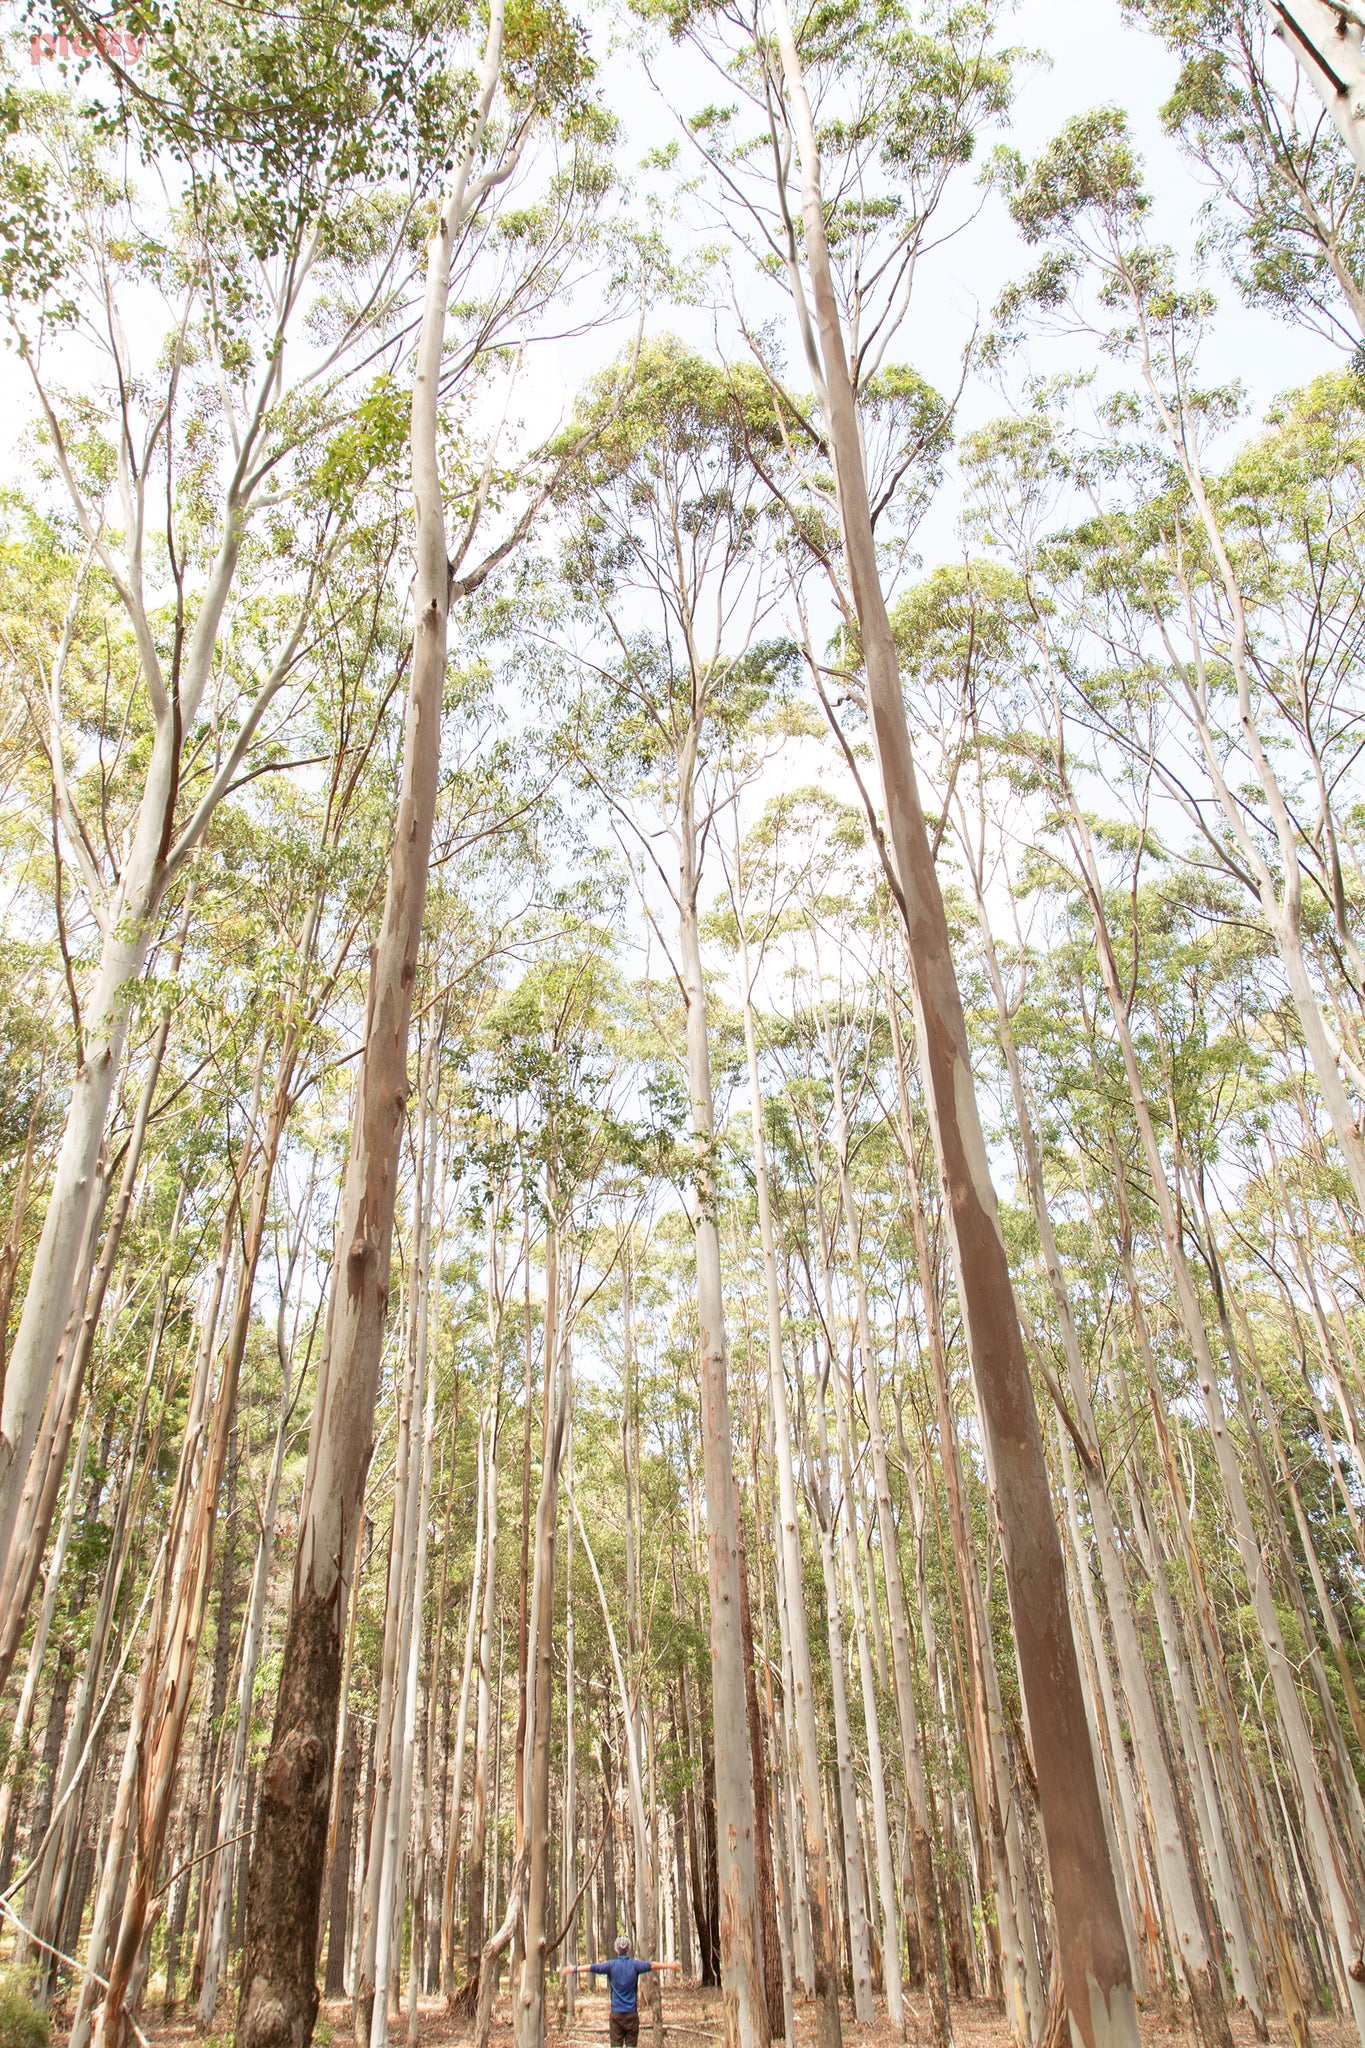 Landscape close up closely packed eucalyptus trees reaching to the sky like thin white fingers, a man in a blue shirt is dwarfed by the size.